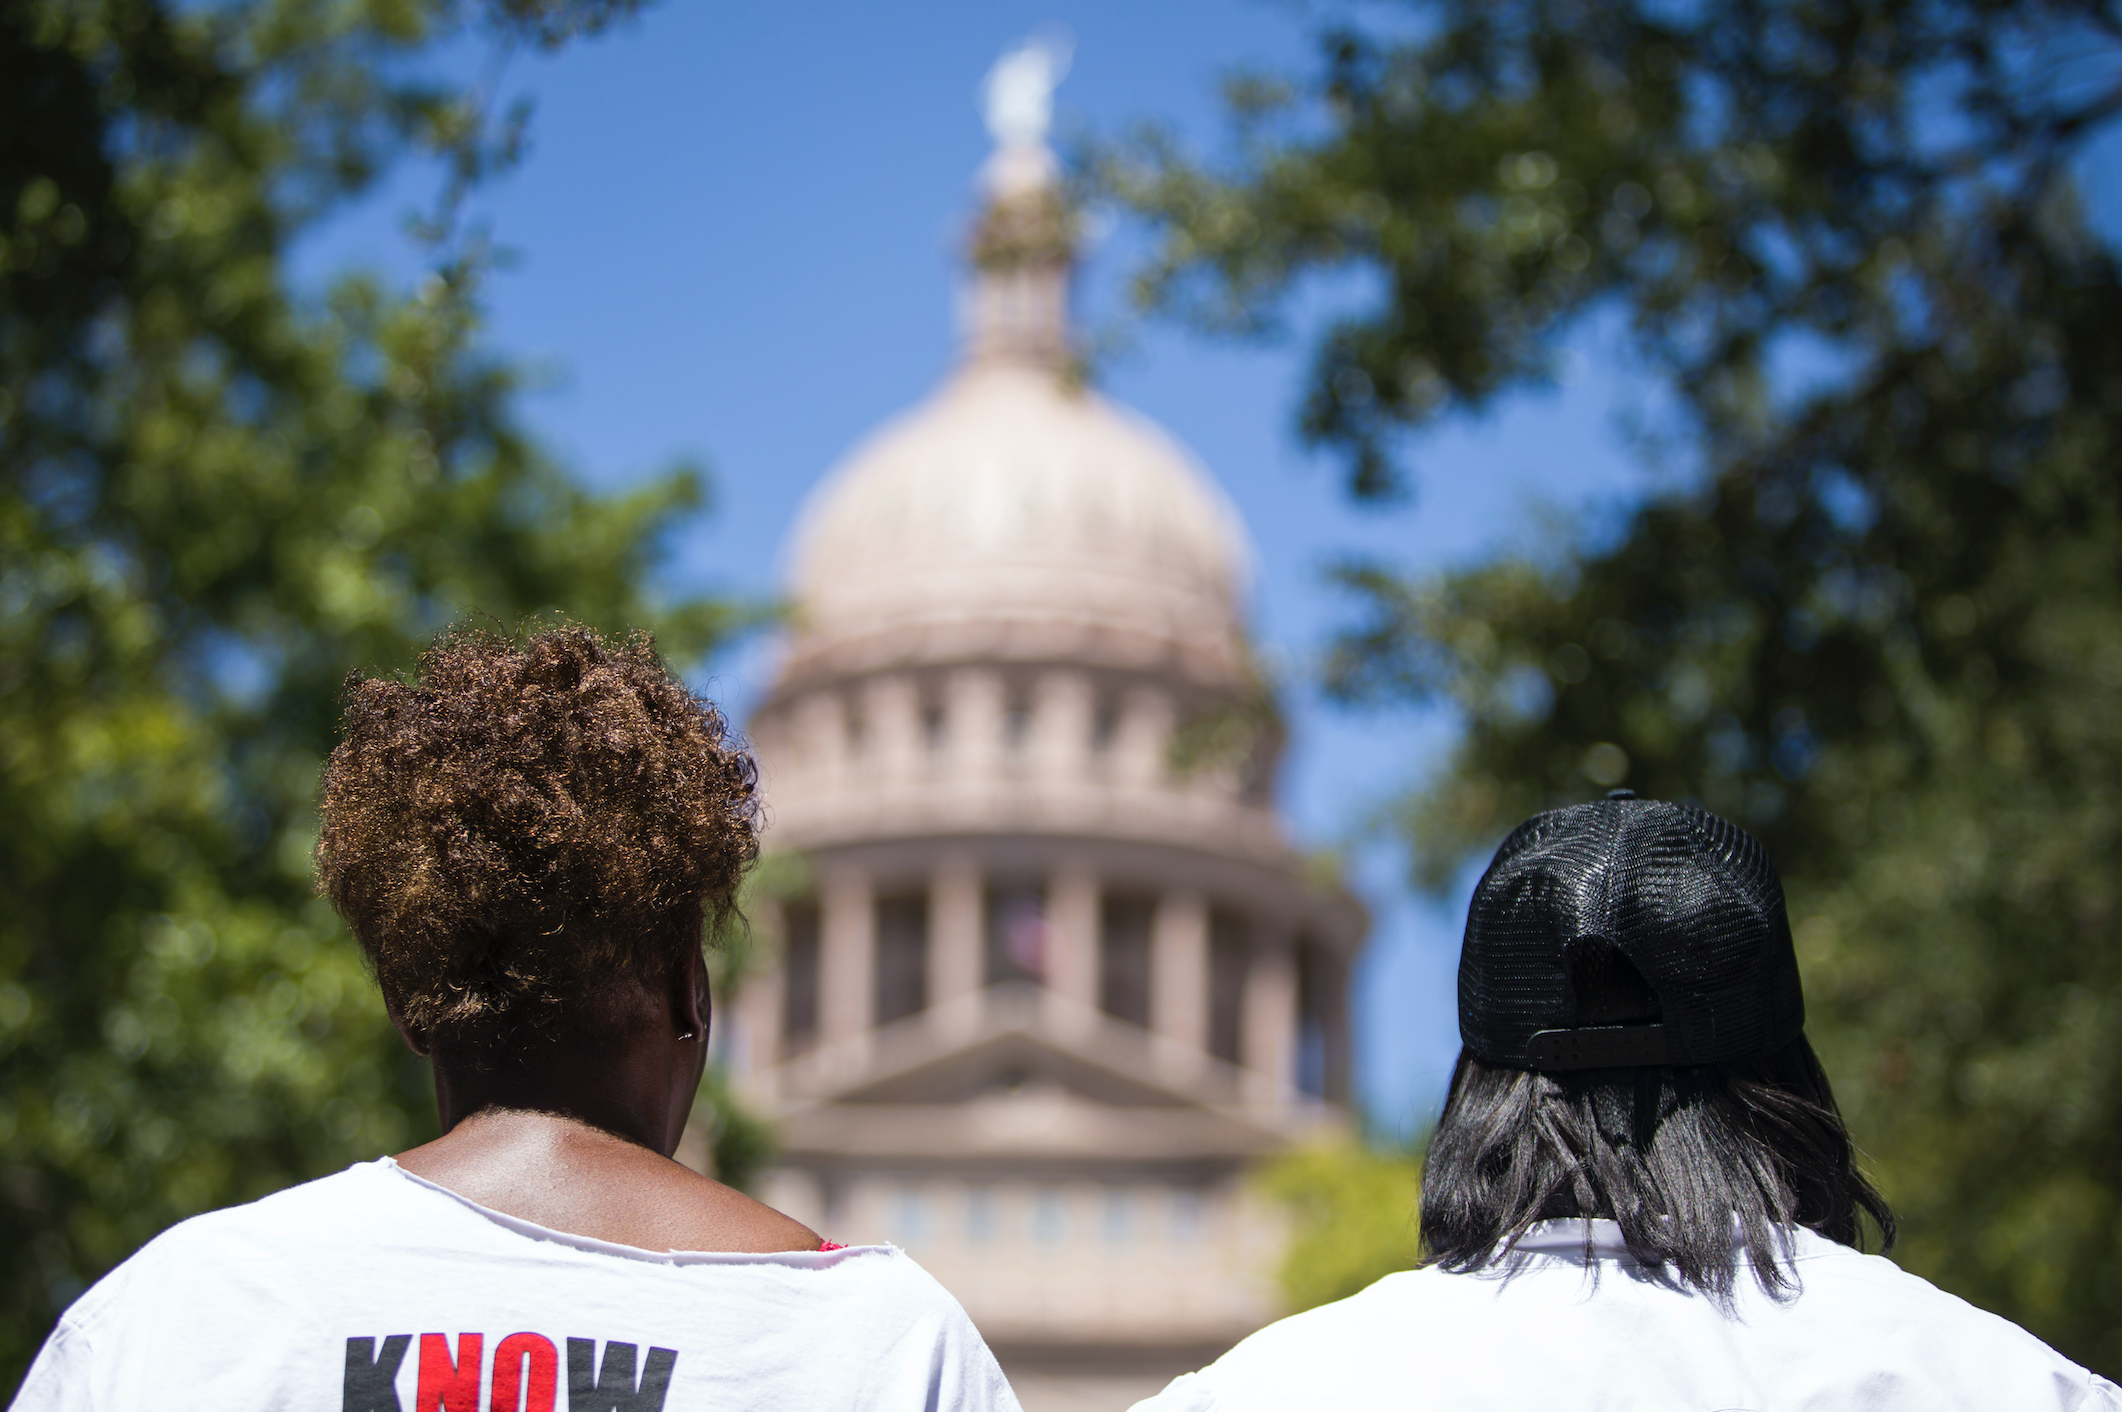  AUSTIN, TX. Activists gather at the Texas State Capitol building to march for criminal justice reform and to commemorate the 55th anniversary of the March on Washington. 